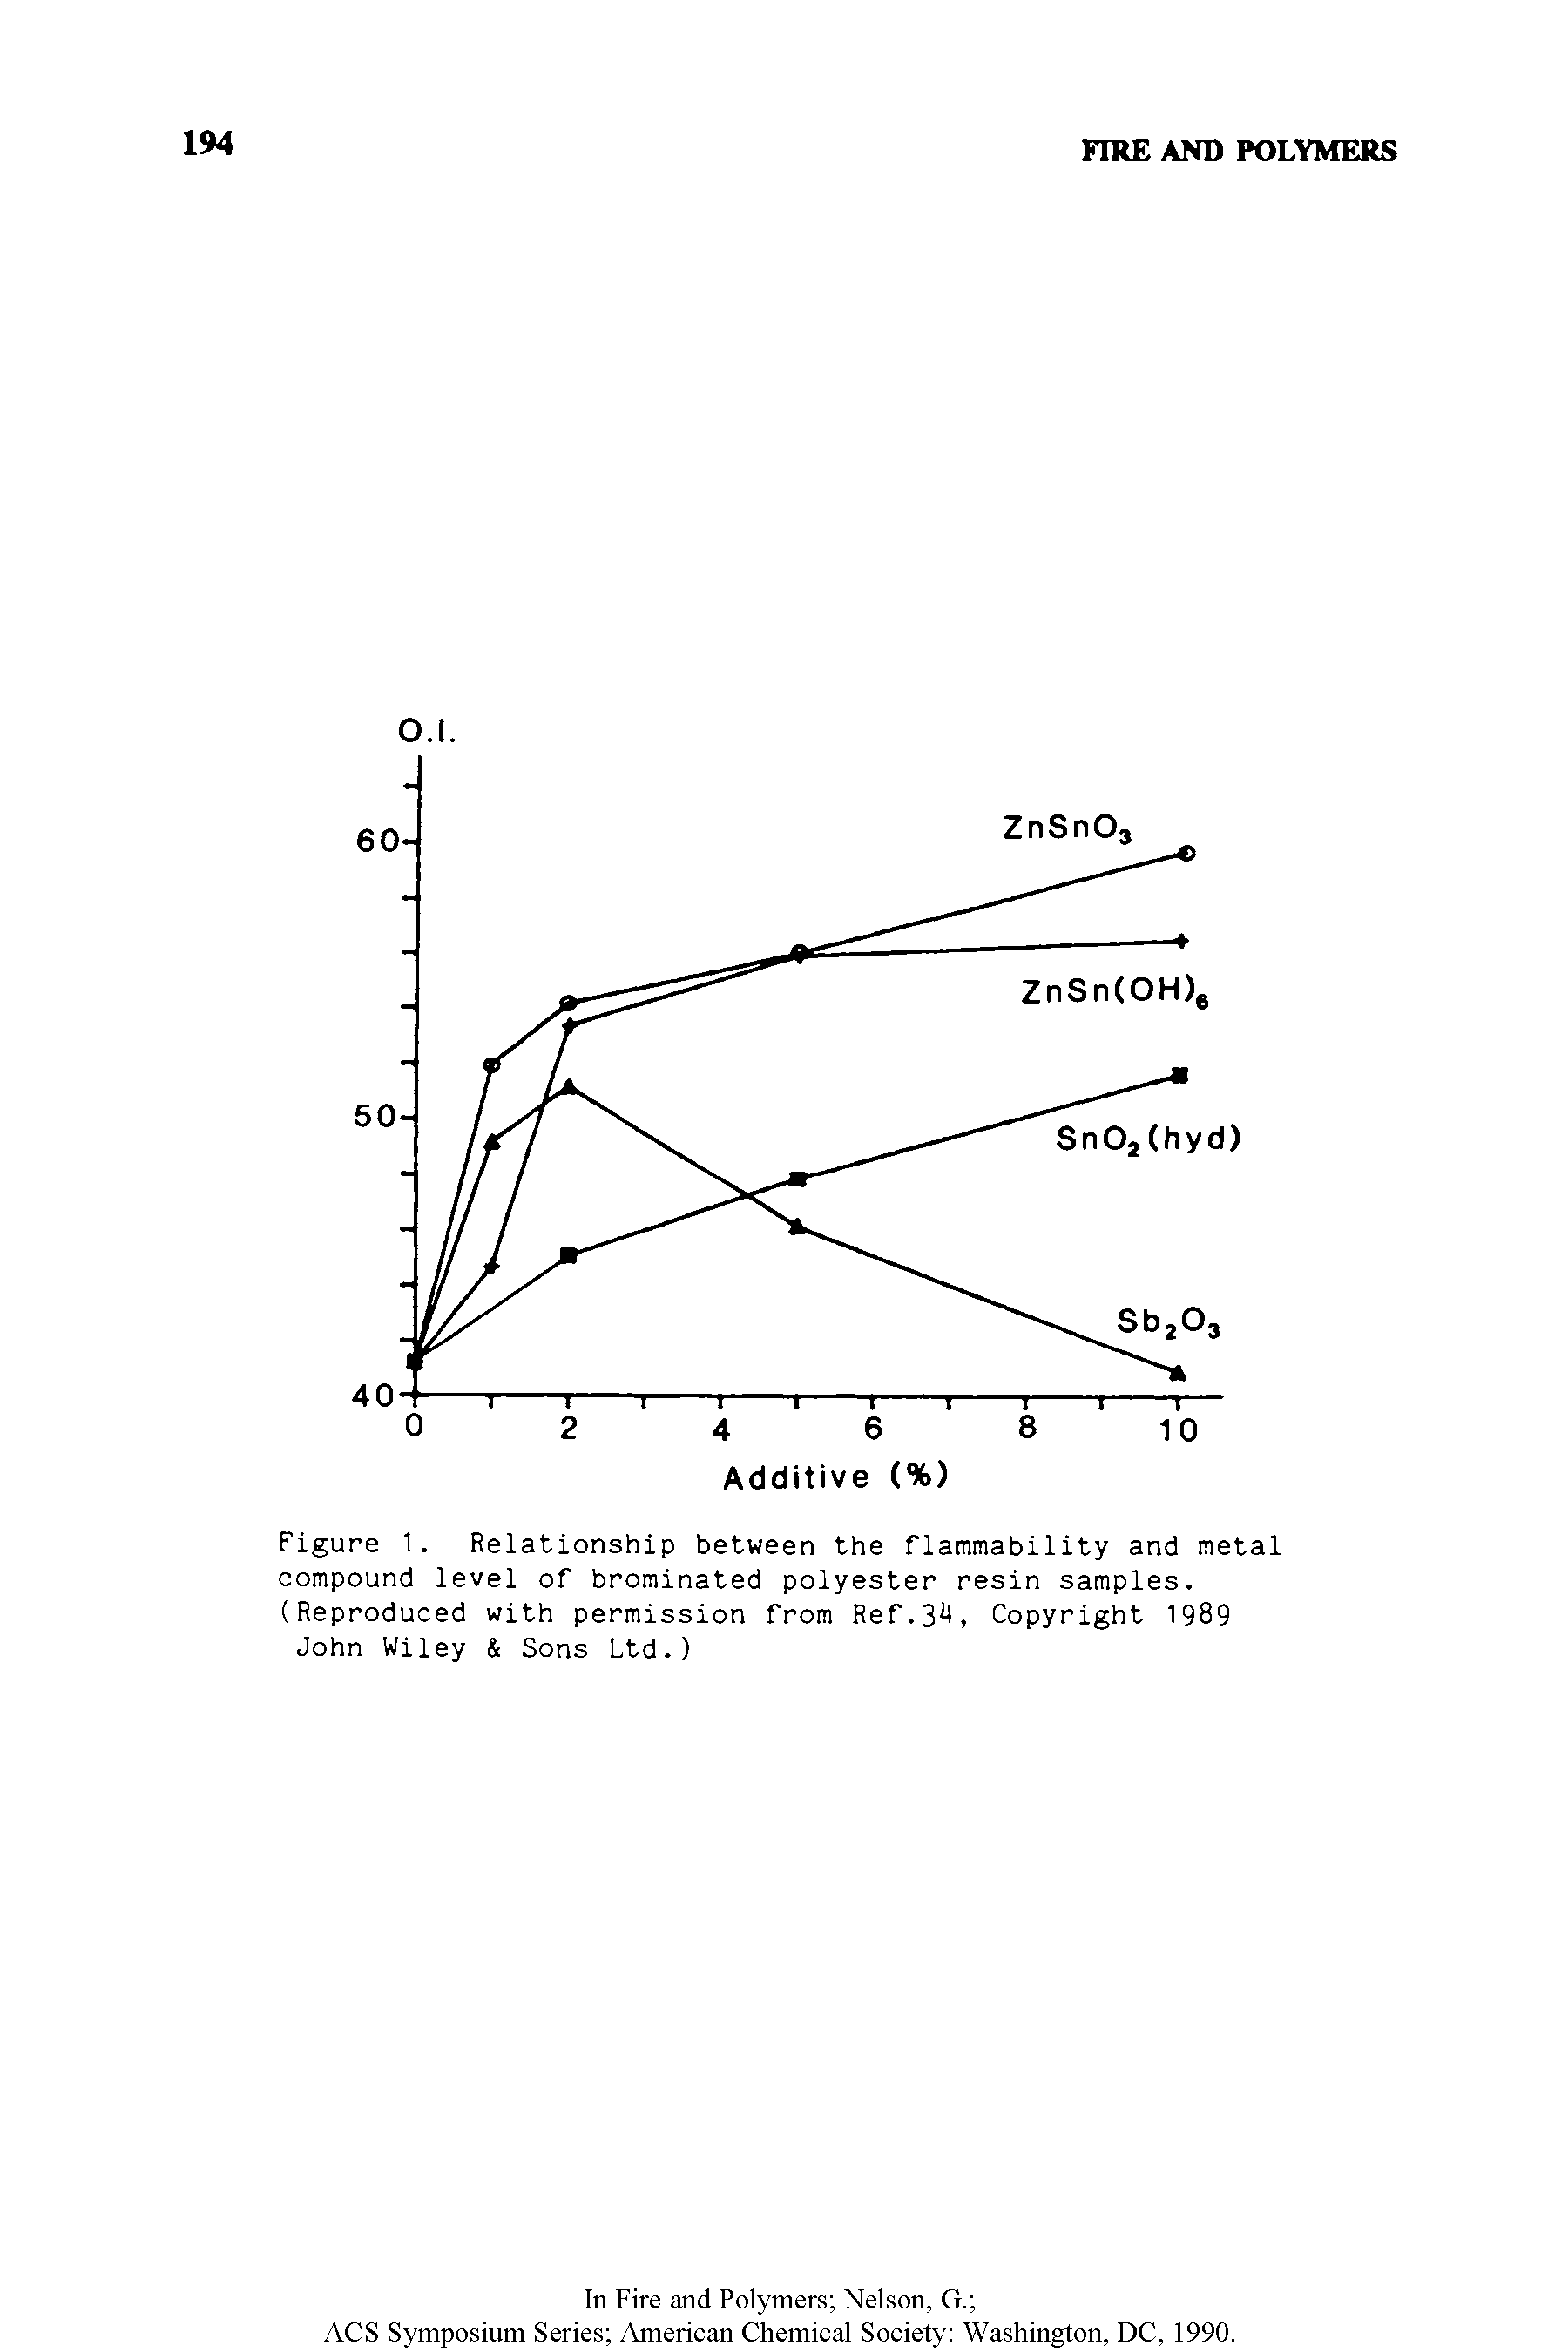 Figure 1. Relationship between the flammability and metal compound level of brominated polyester resin samples. (Reproduced with permission from Ref.3 > Copyright 1989 John Wiley Sons Ltd.)...